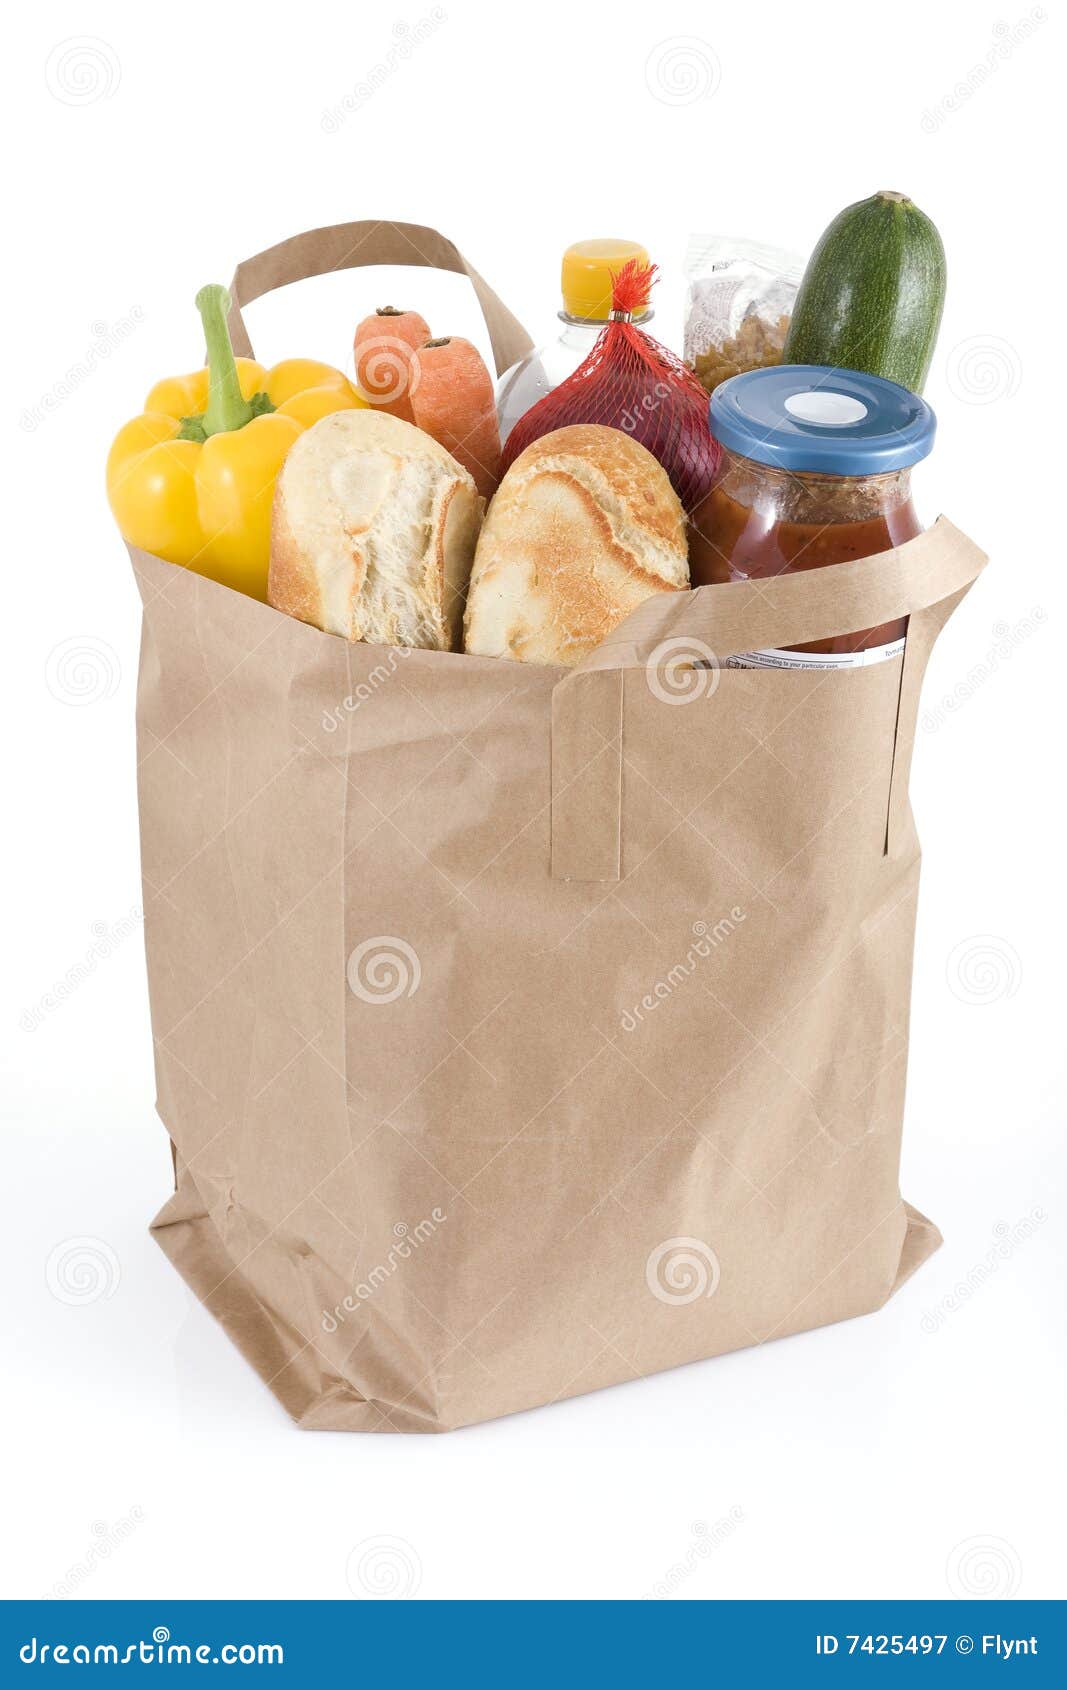 Bag of groceries stock image. Image of eating, glass, vertical - 7425497